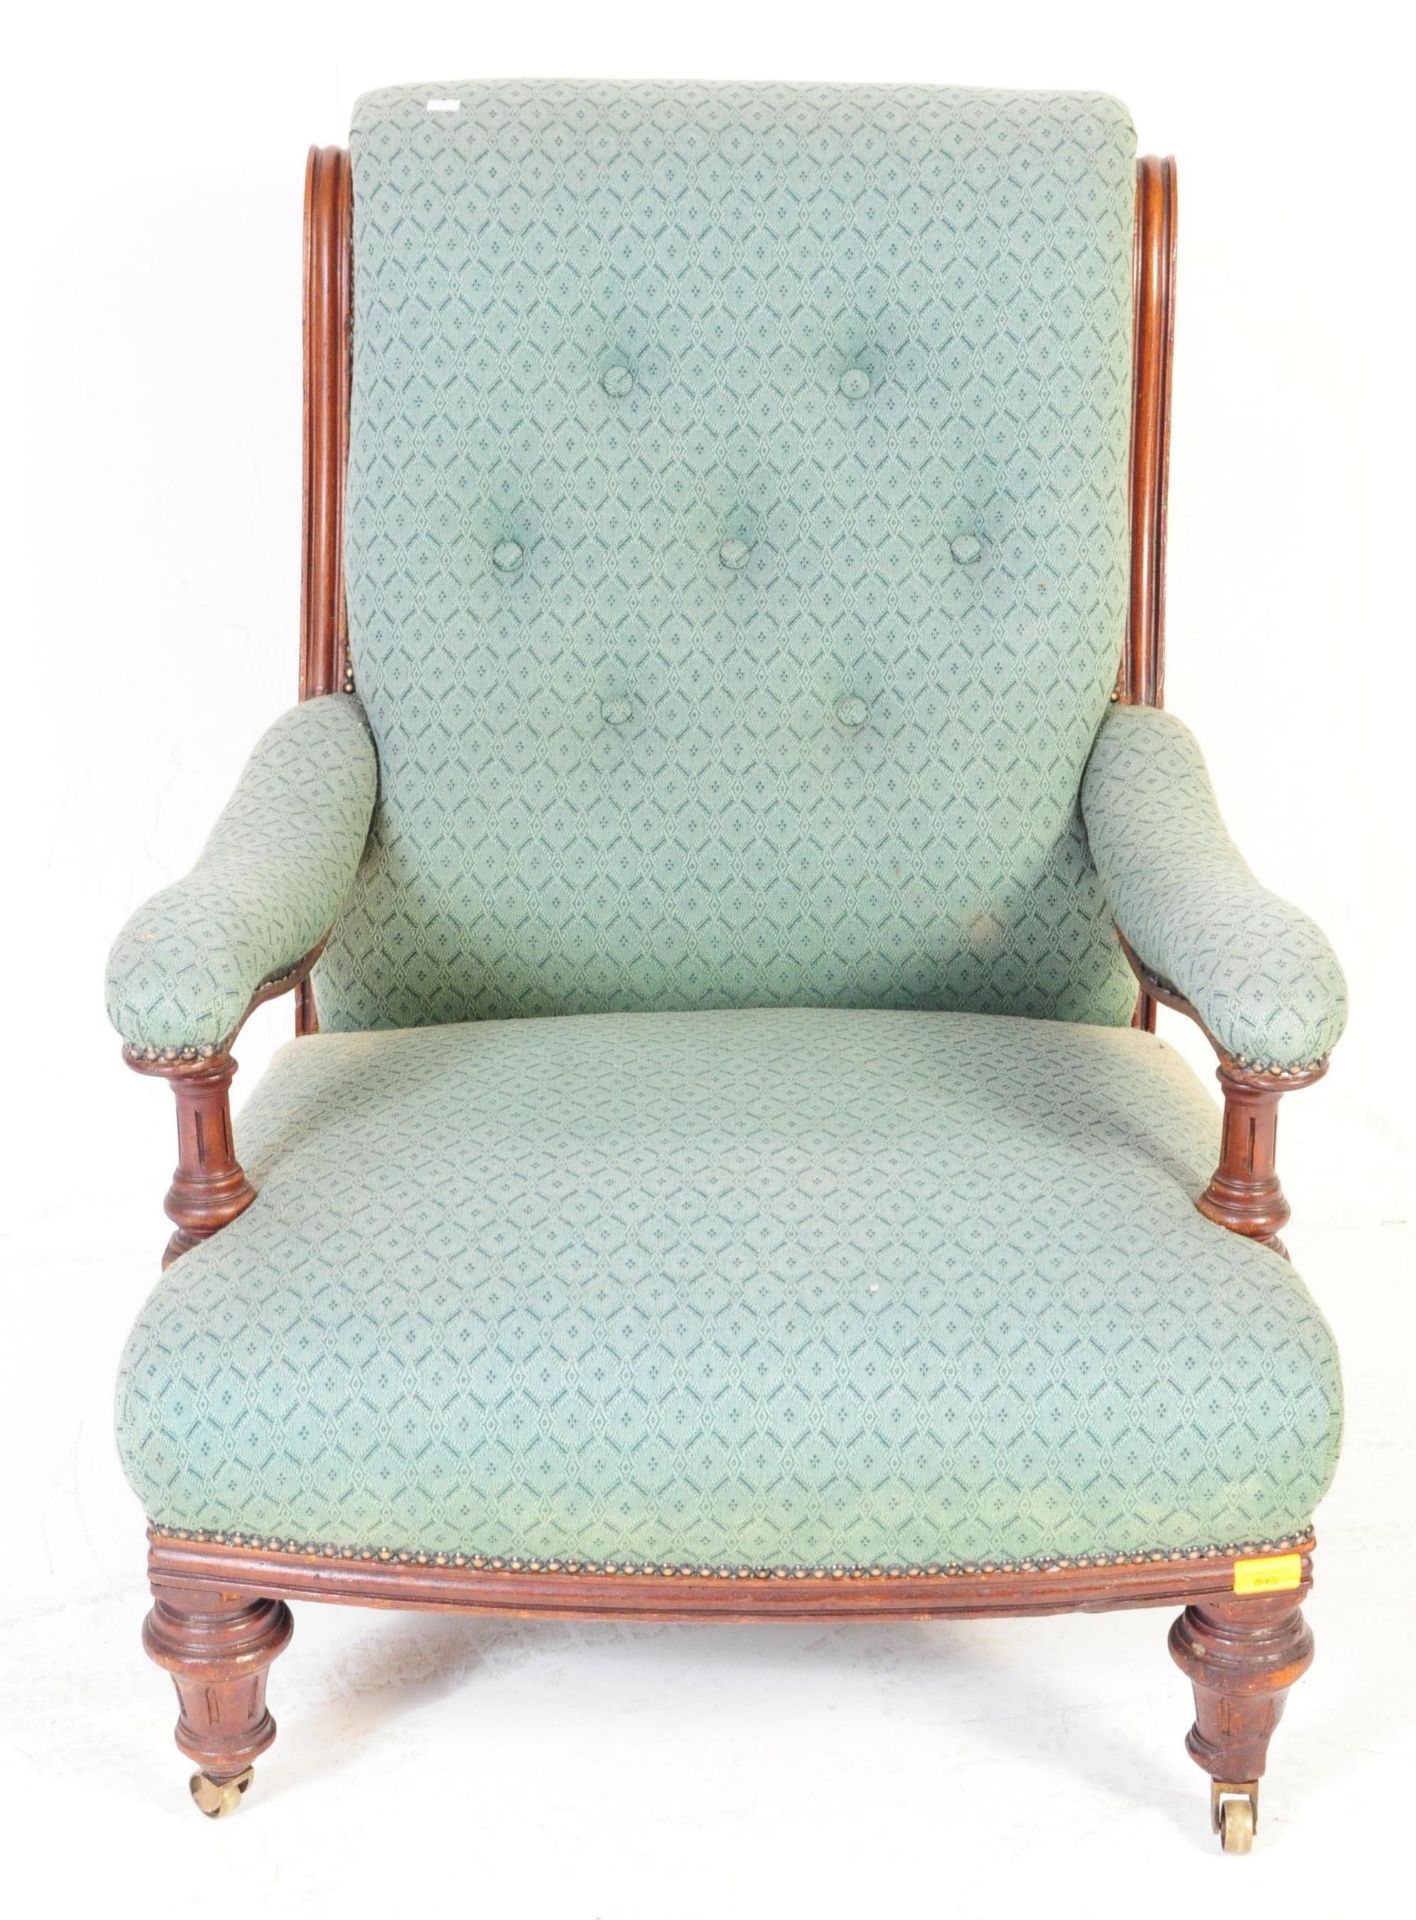 EARLY 20TH CENTURY GENTLEMANS LIBRARY CHAIR - Image 3 of 5